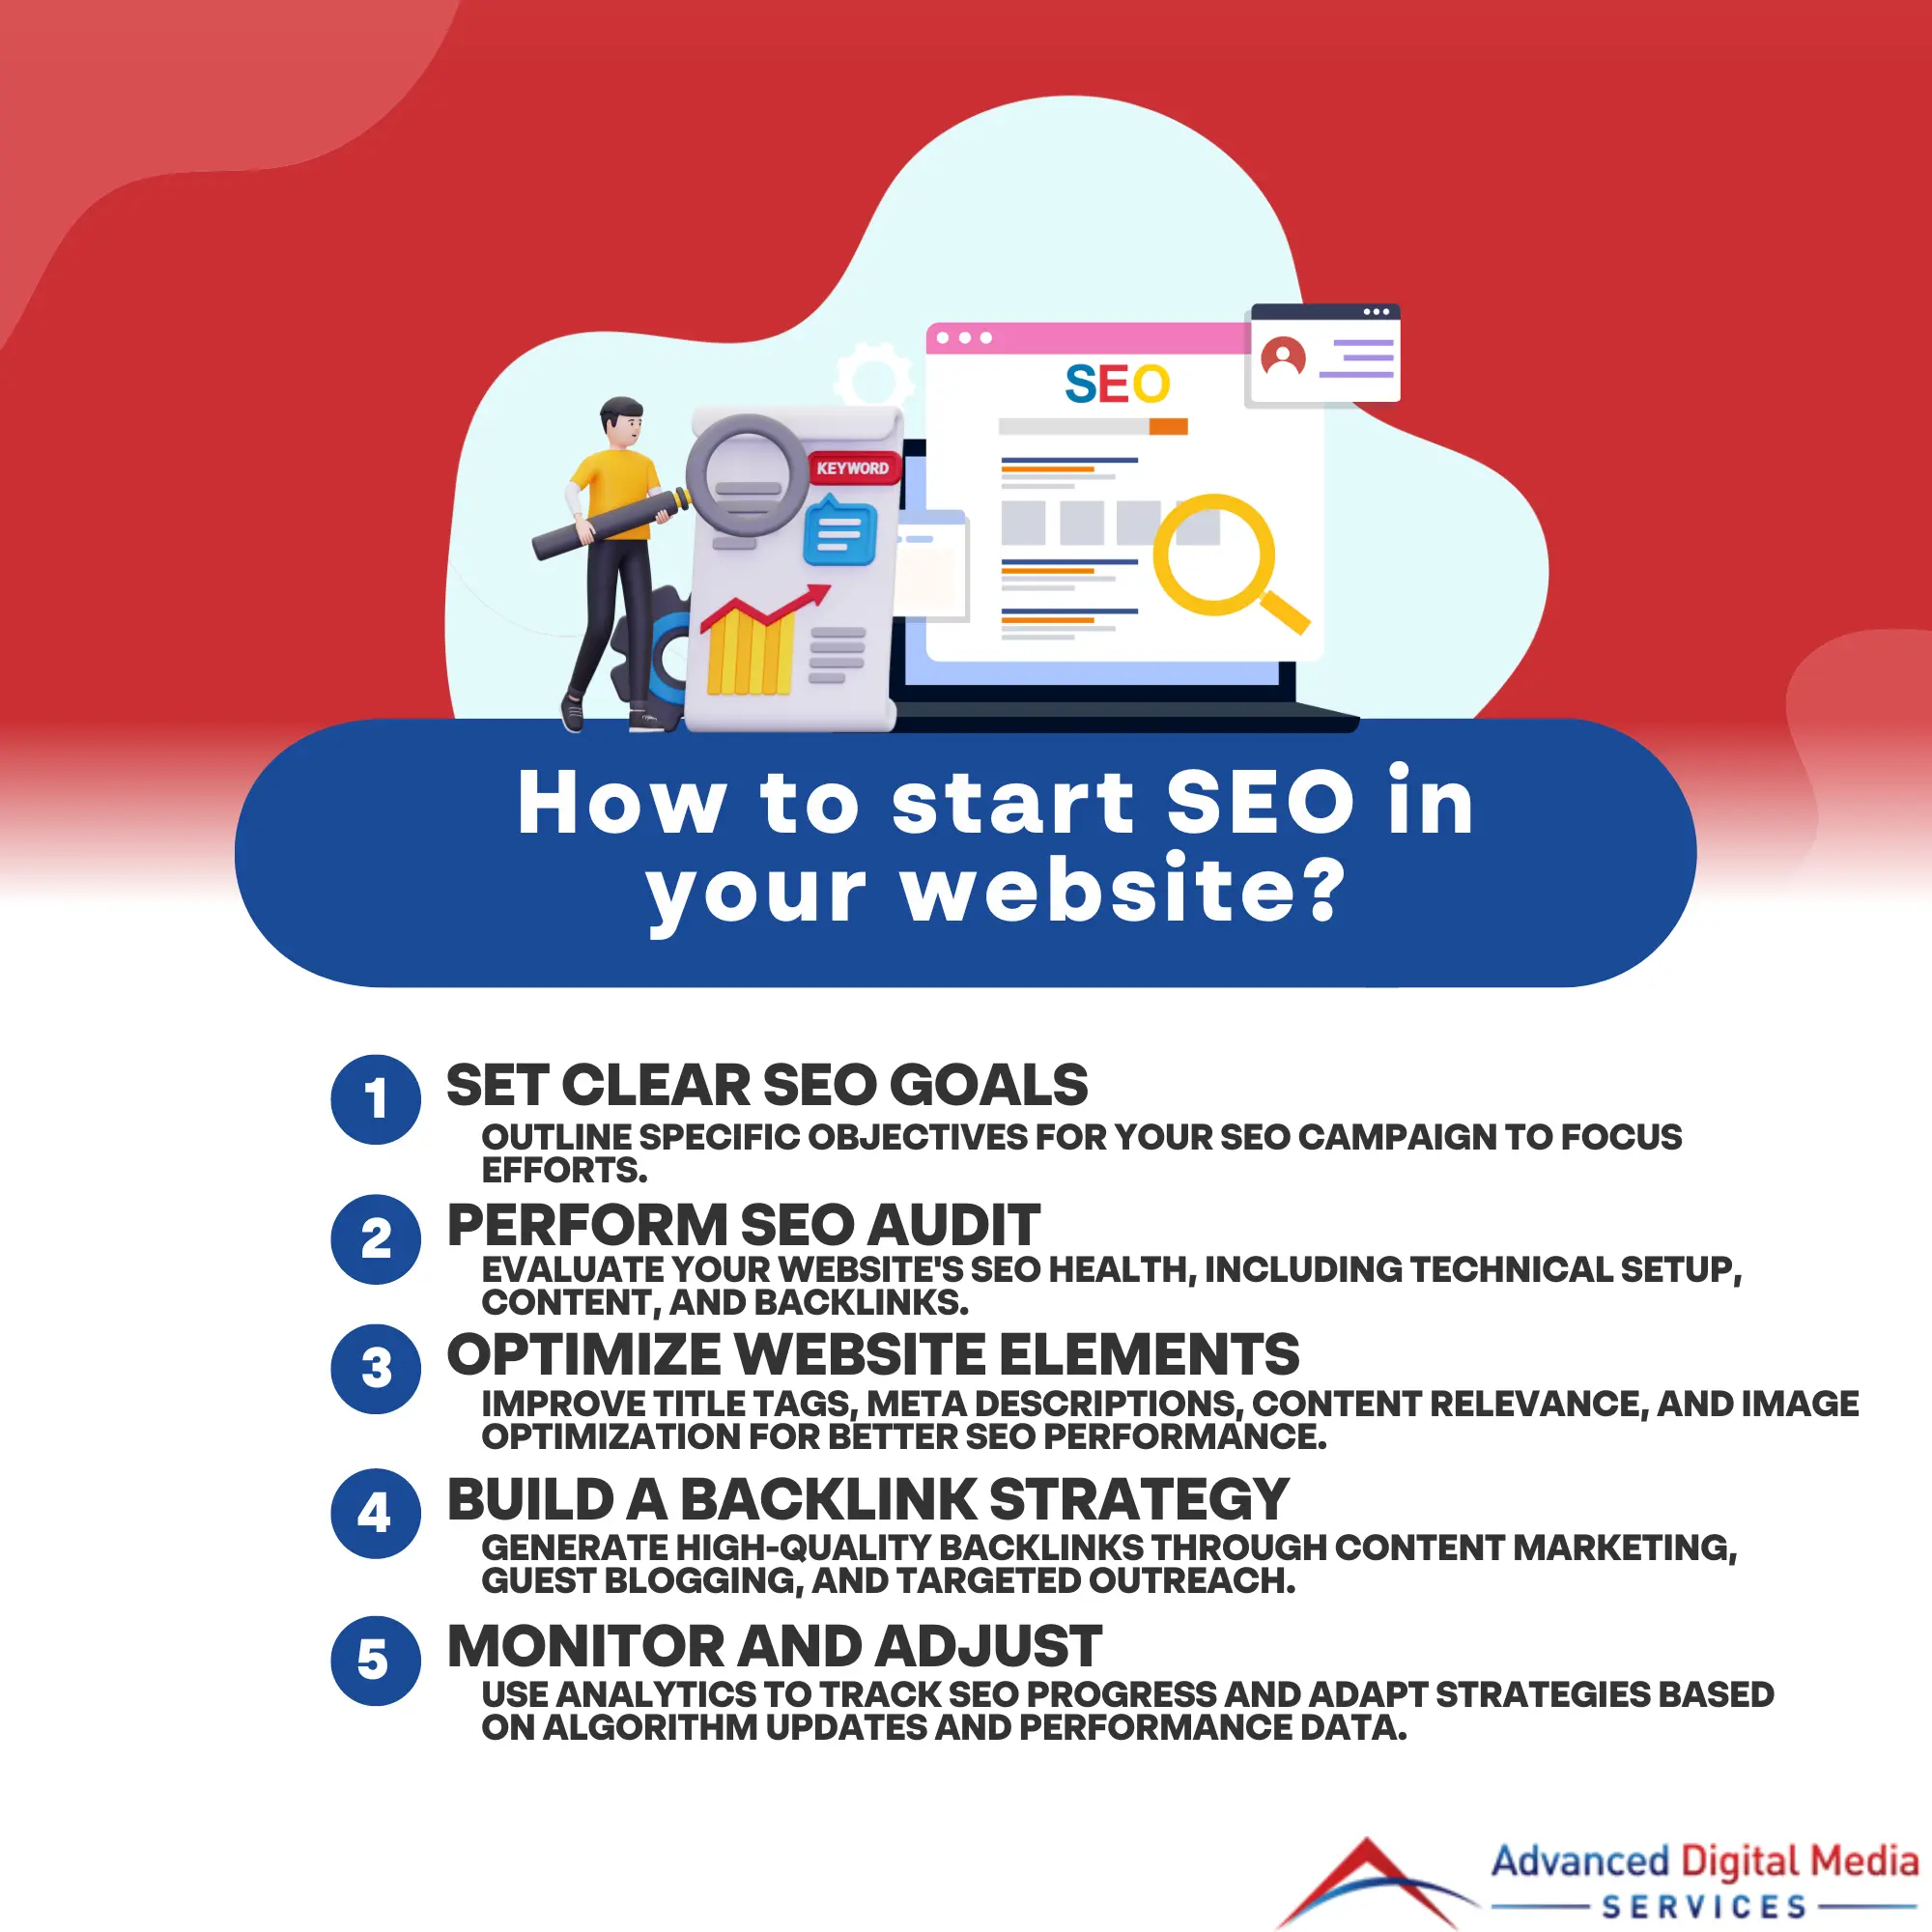 How to Start SEO in your Website | ADMS